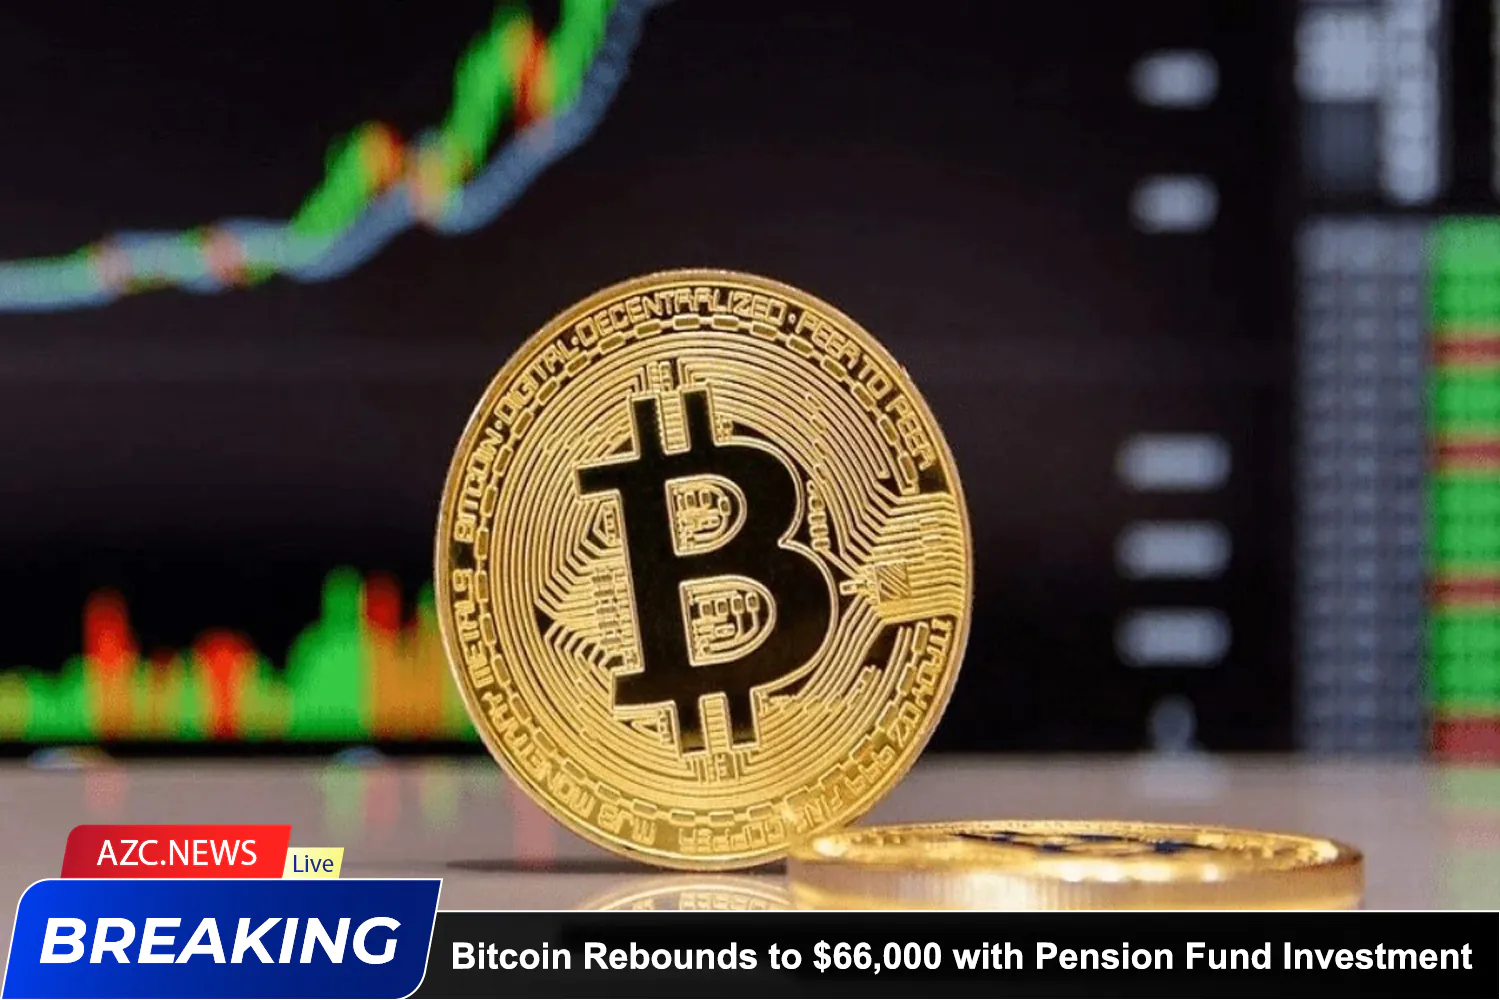 Azcnews Bitcoin Rebounds To $66,000 With Pension Fund Investment